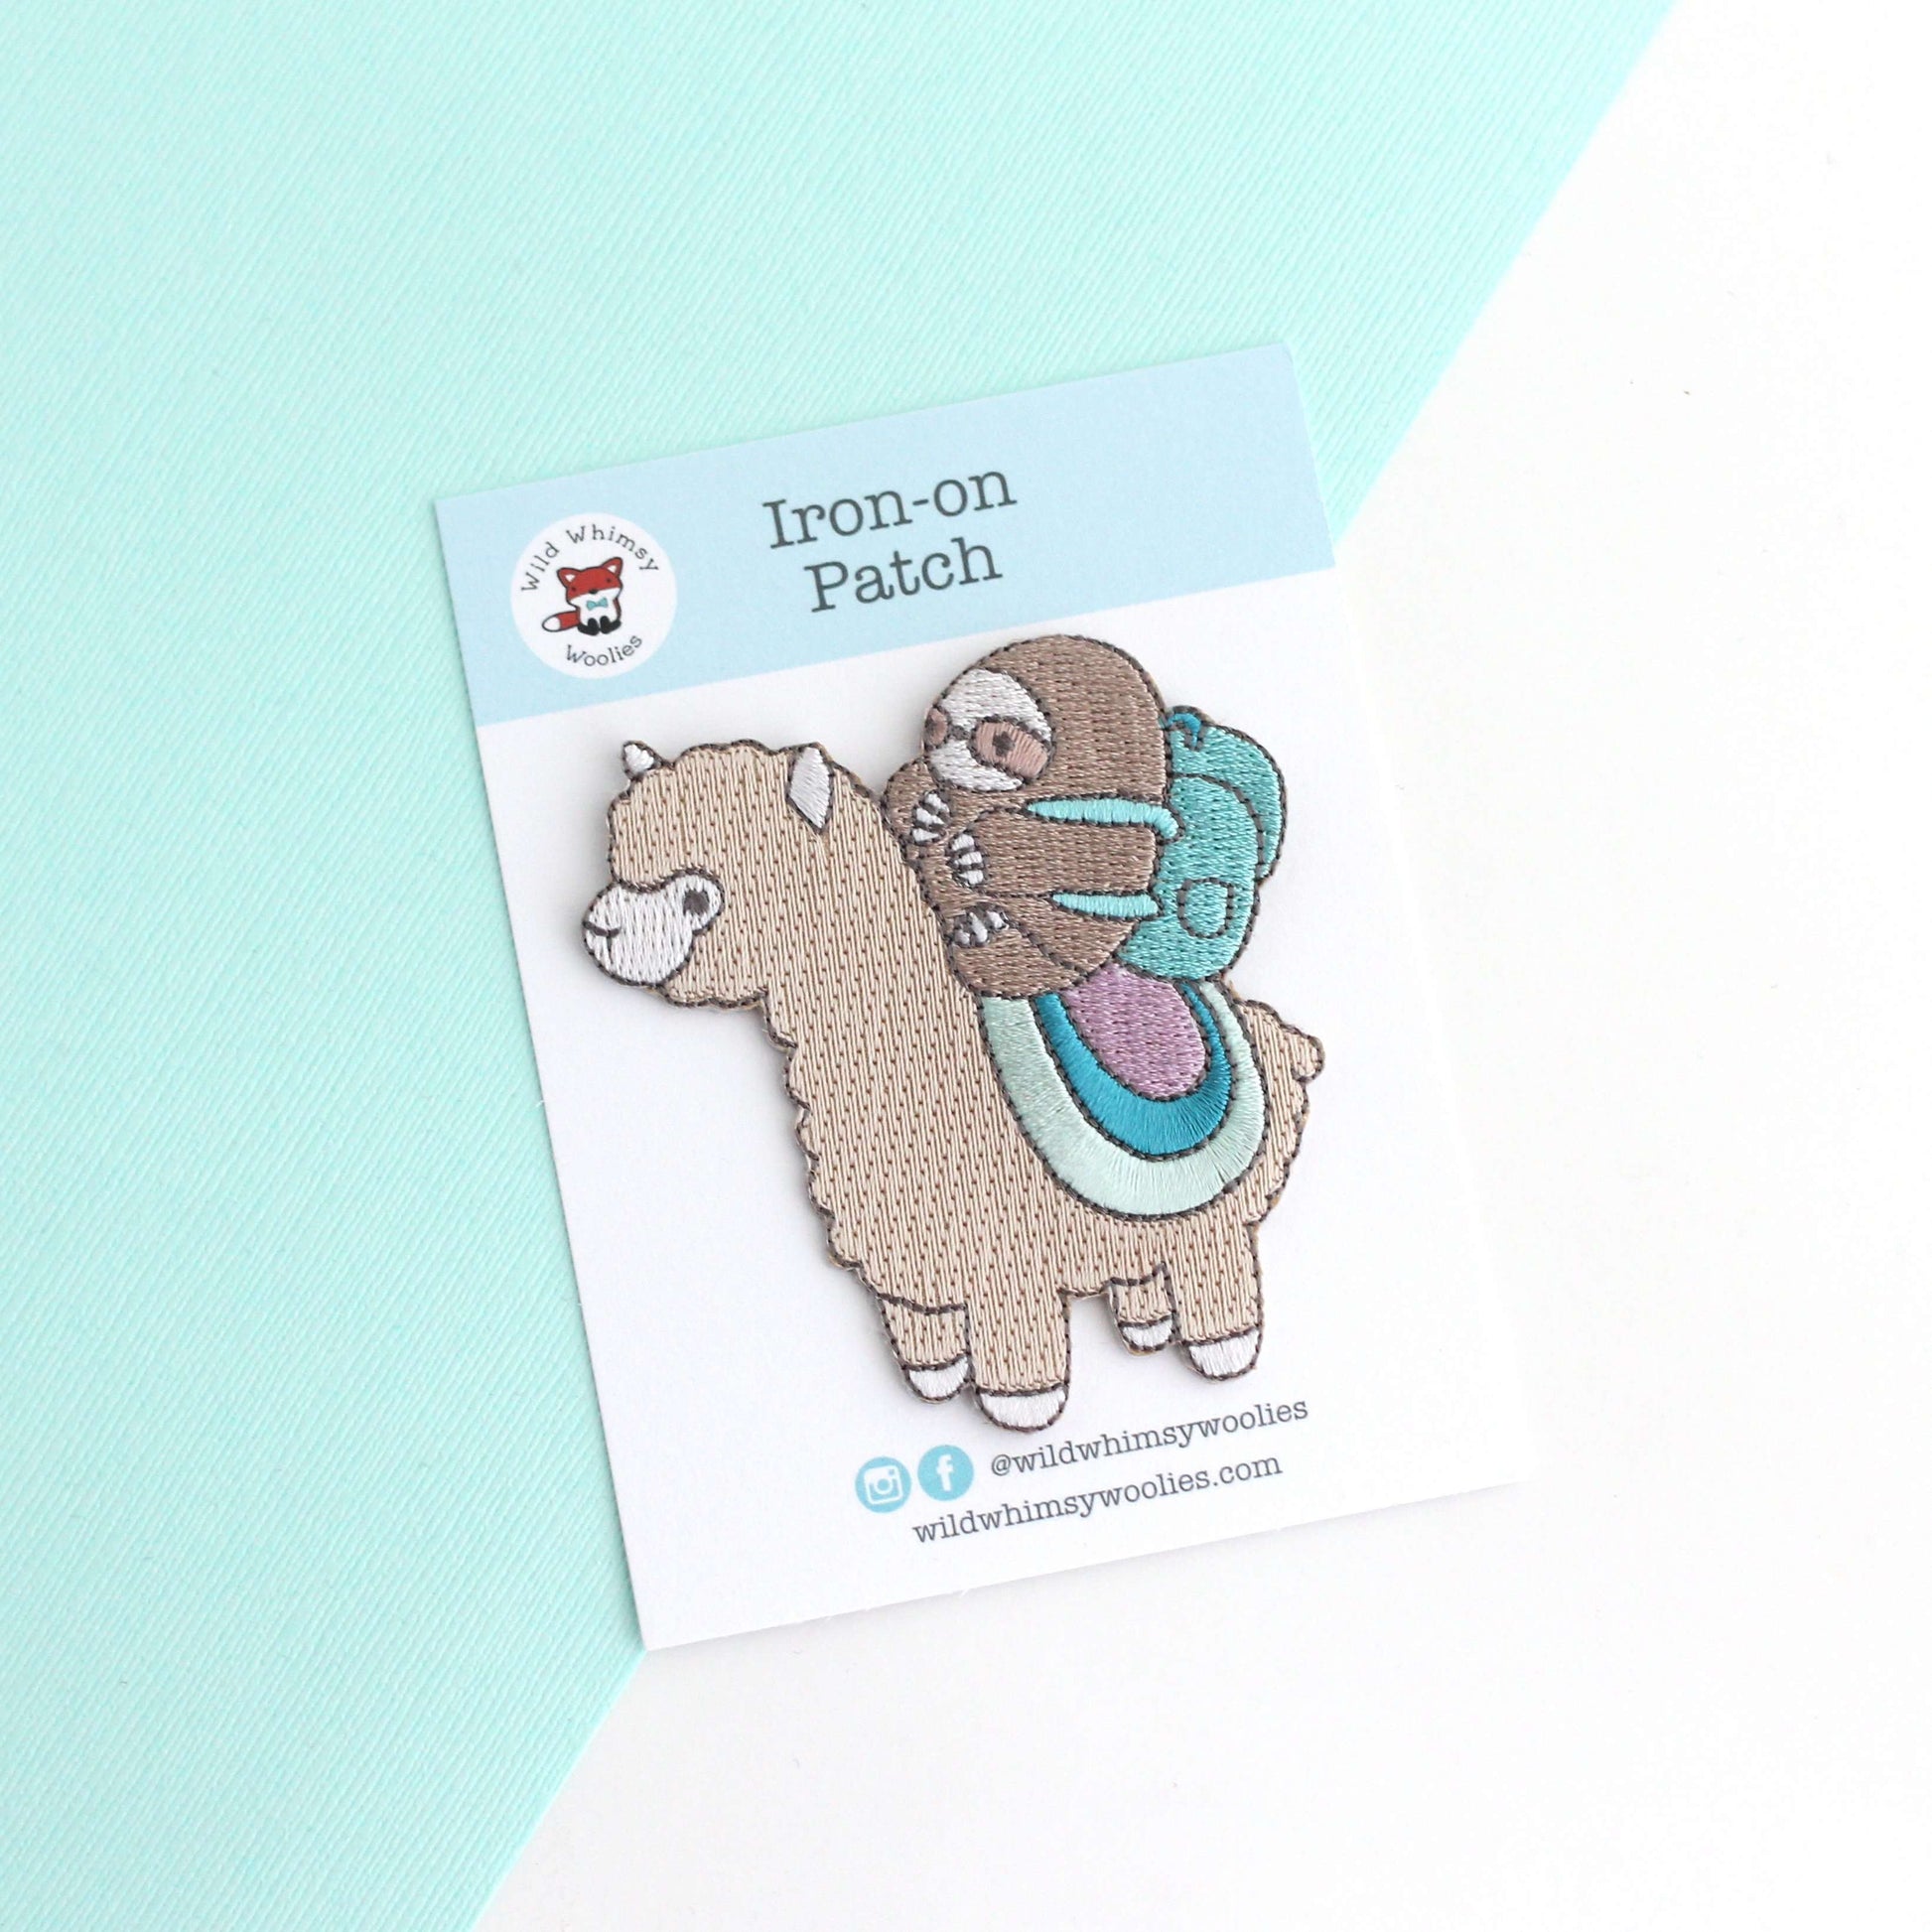 Sloth and Alpaca Adventurer Embroidered Iron-On Patch - Llama Patch by Wild Whimsy Woolies